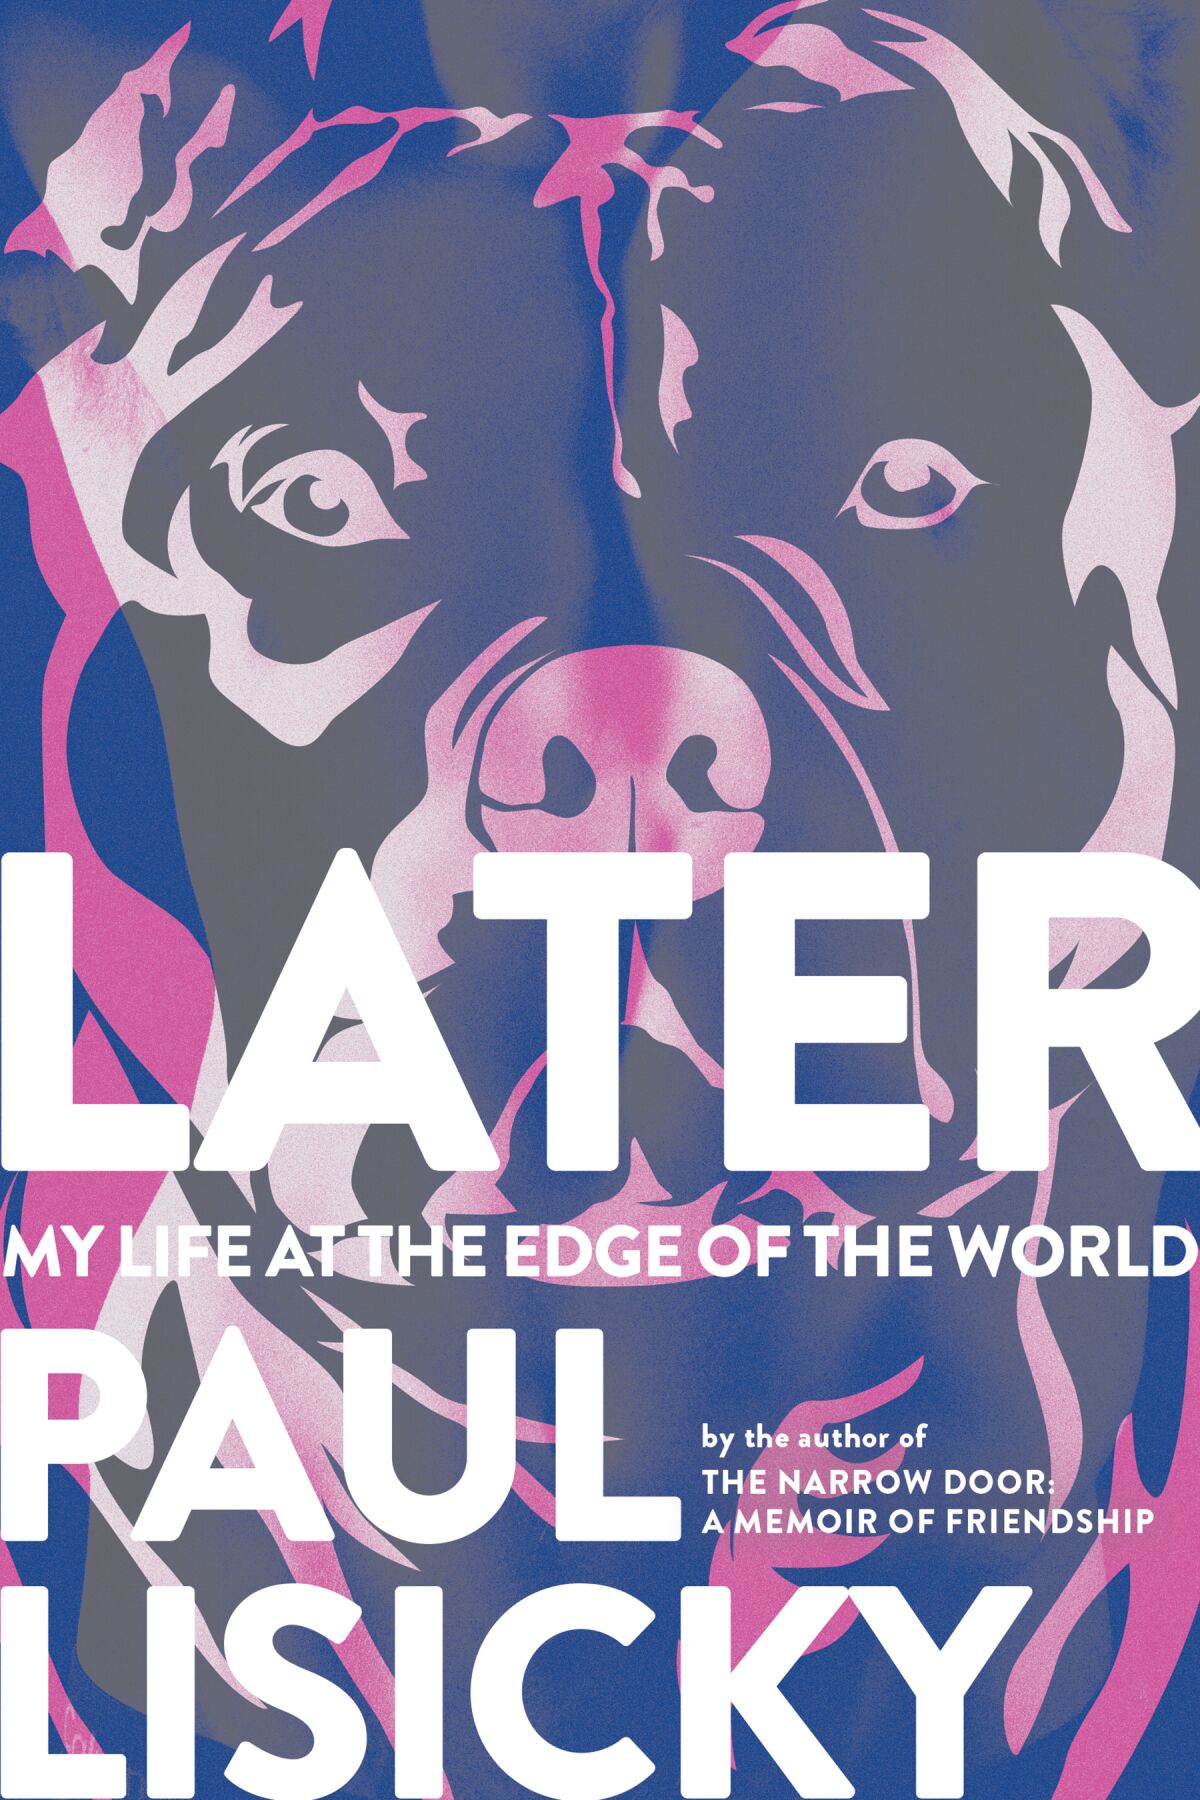 A book jacket for Paul Lisicky's "Later: My Life at the Edge of the World." Credit: Graywolf Press